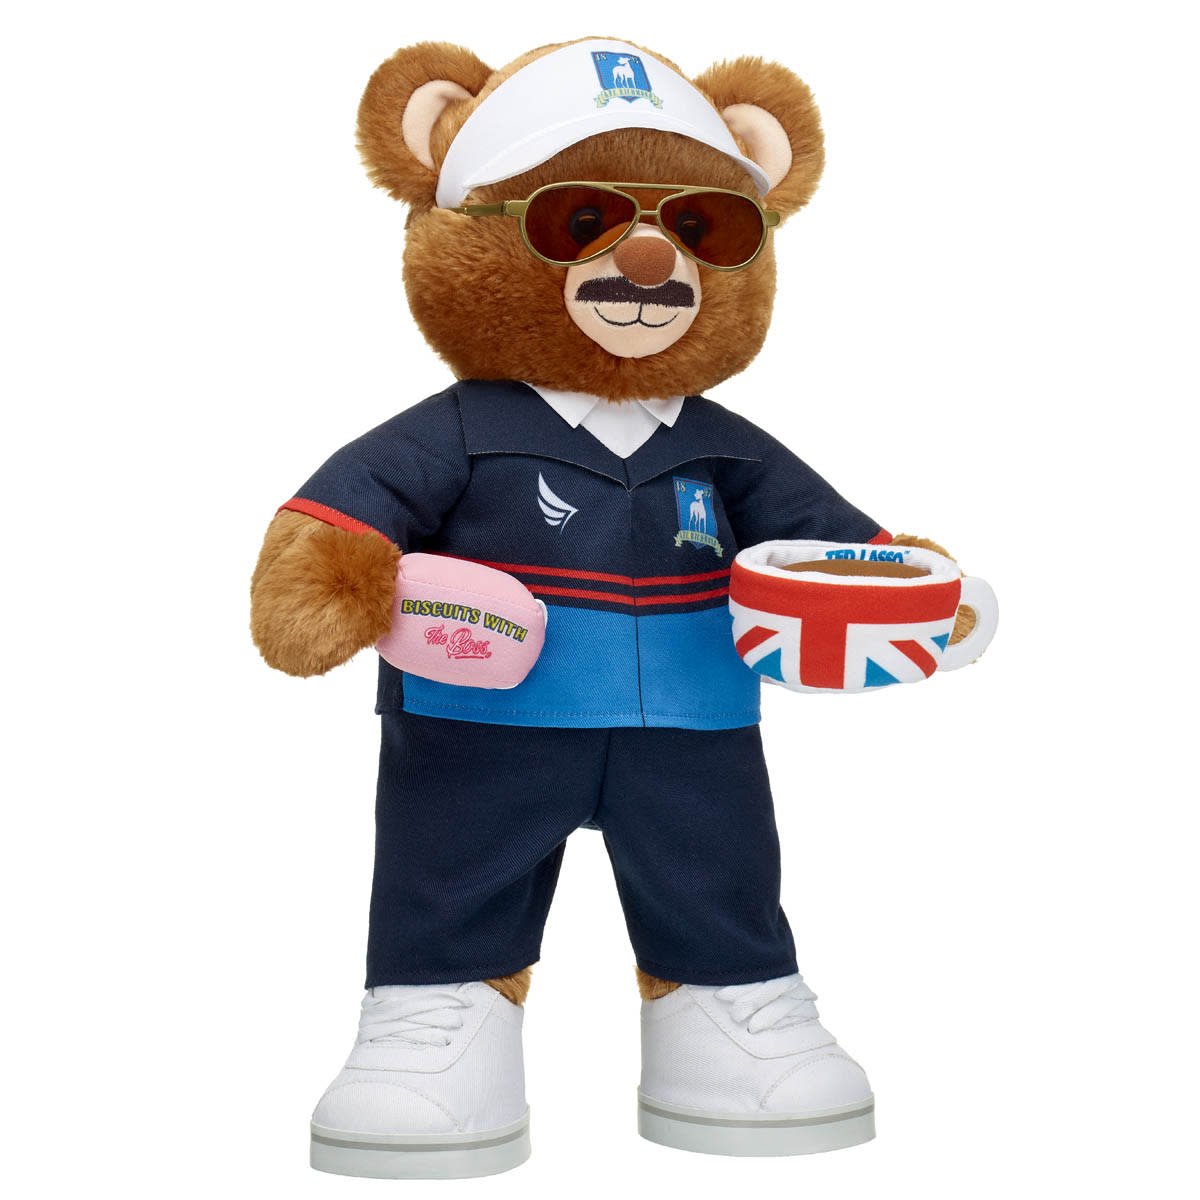 Add a football kit, biscuit package and tea cup to complete your Ted Lasso Build-A-Bear. (Photo: Courtesy of Build-A-Bear)